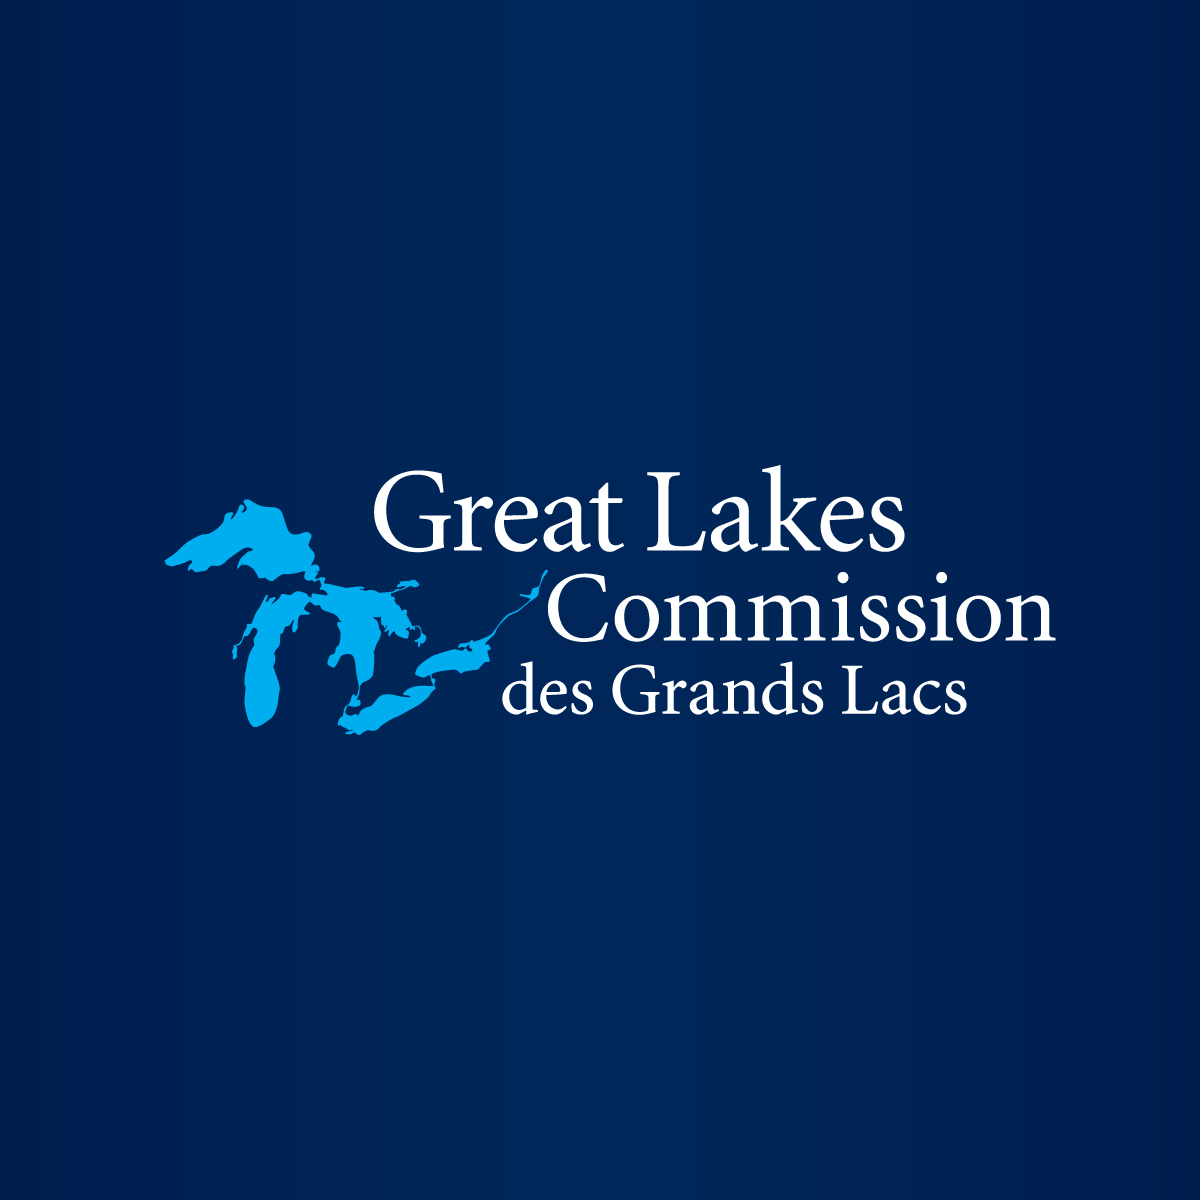 Major fund for Great Lakes programs expected to fare well in new budget